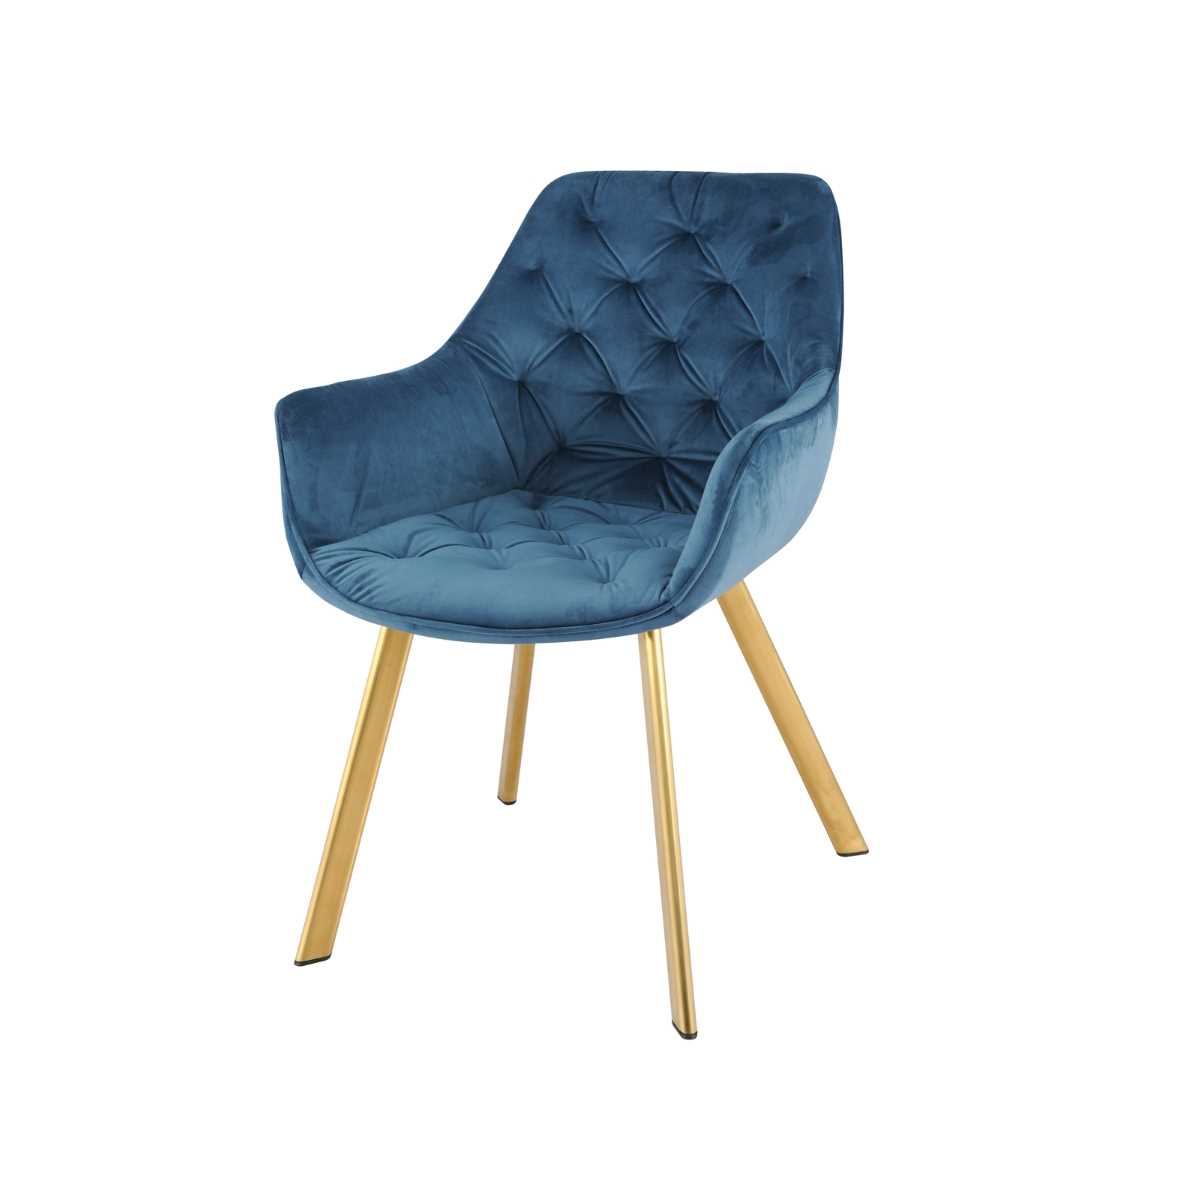 Ayami Chairs Set Of 2 Blue With Gold Legs 1322